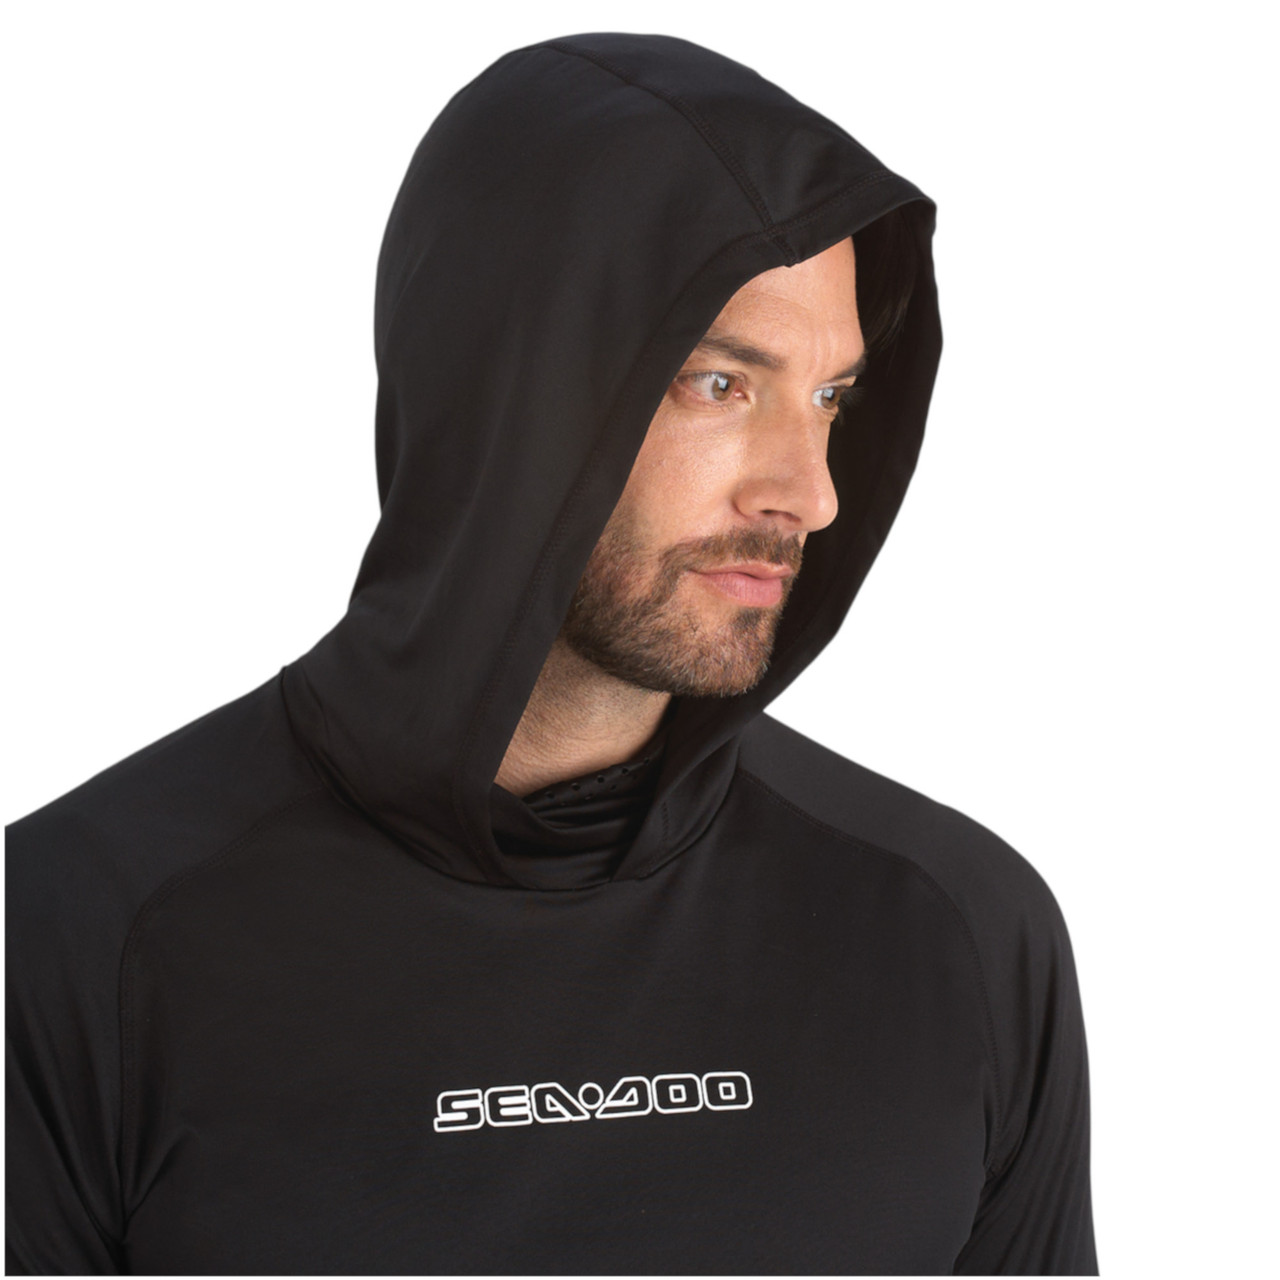 Sea-Doo New OEM, Men's Extra Large Cooling UV Protection Hooded Shirt 4546591290